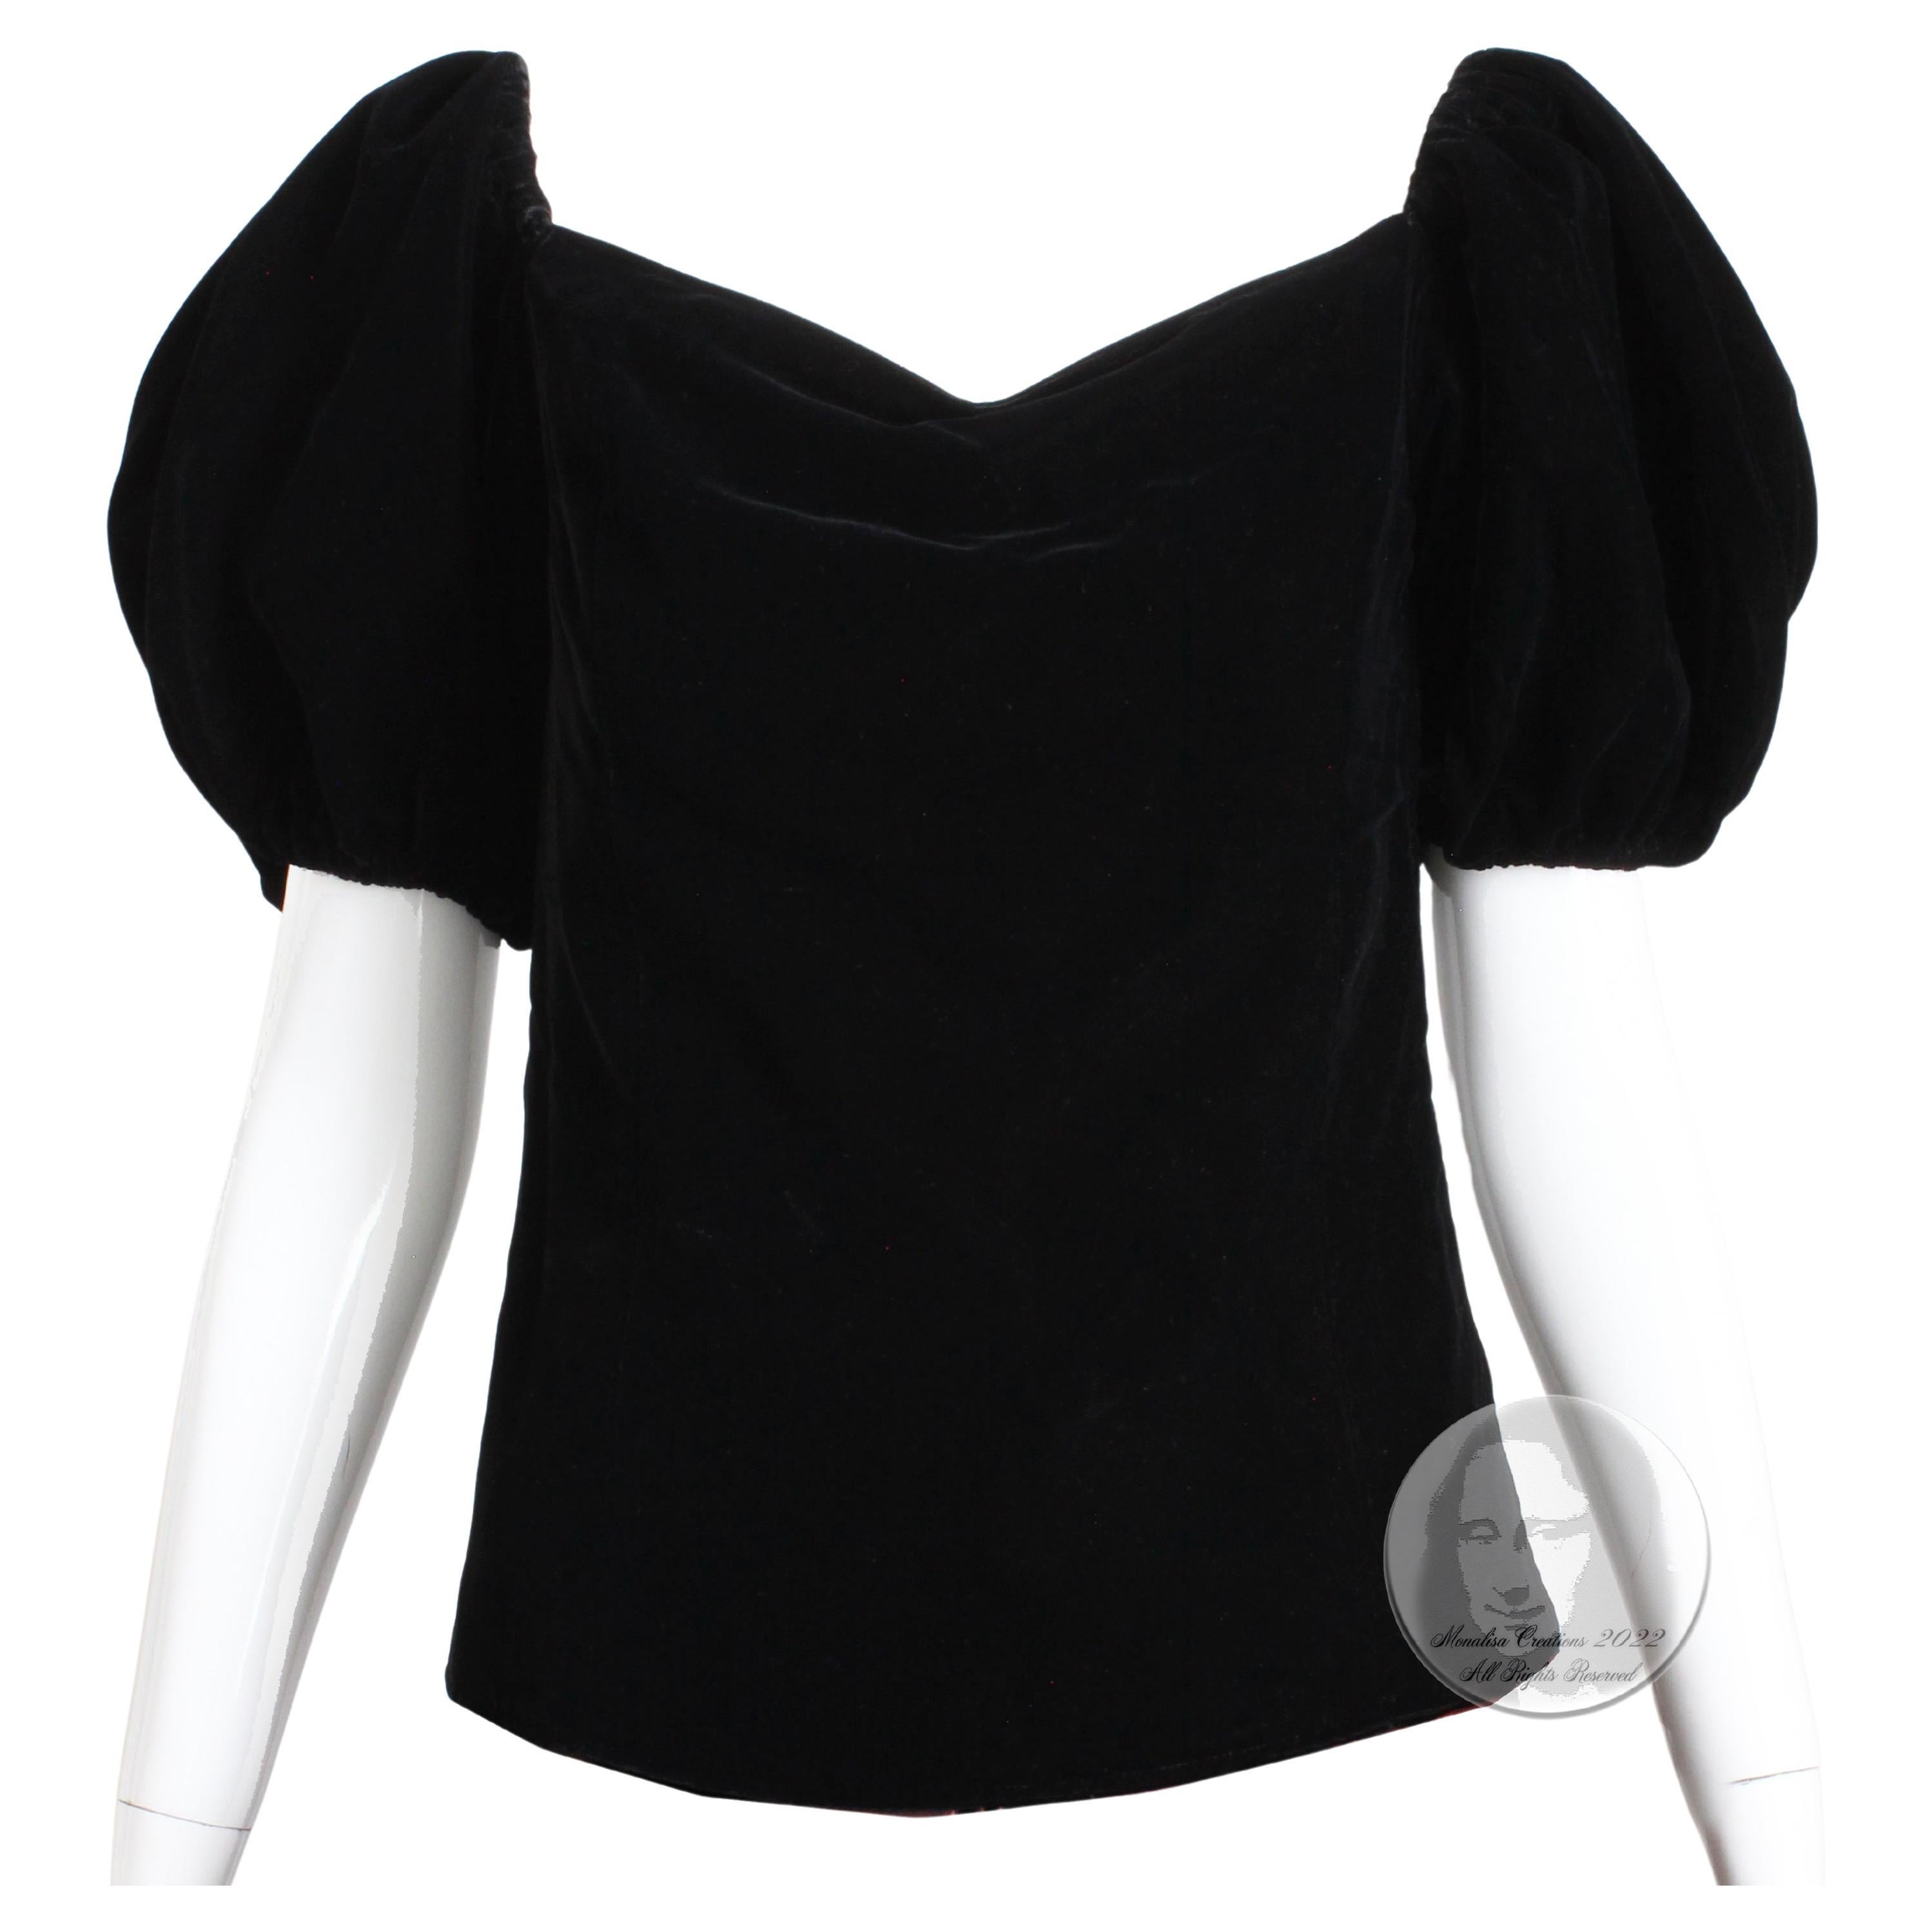 Authentic, preowned, vintage Yves Saint Laurent Rive Gauche puffed sleeve peasant blouse, likely made in the late 70s or early 80s.  Made from black velvet with elasticized sleeves, it's fully lined and fastens with a zipper under the wearers left